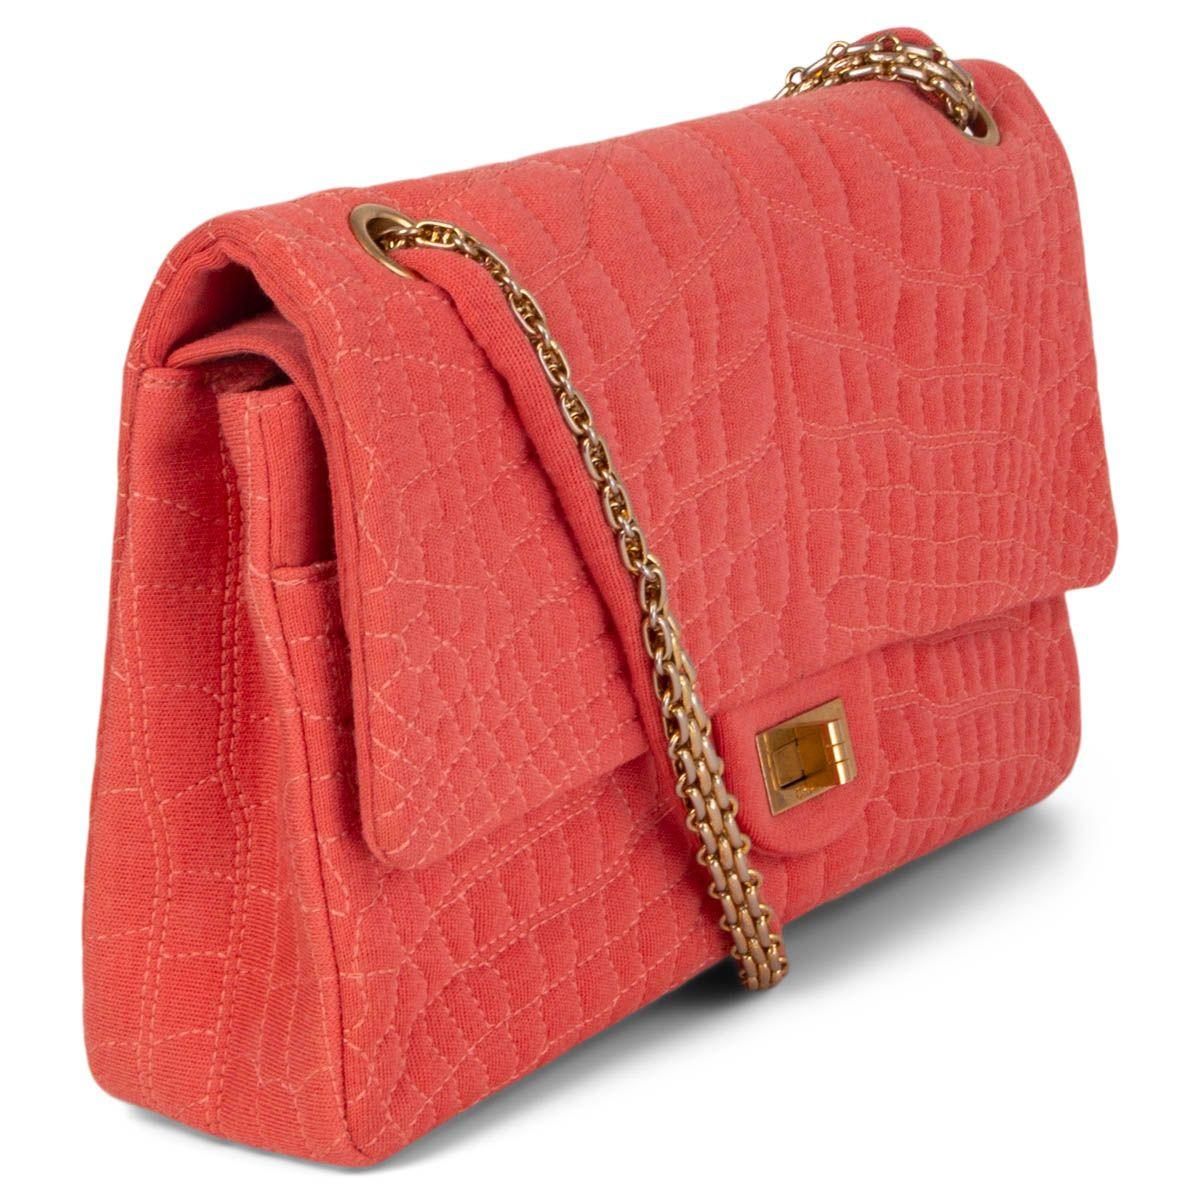 100% authentic Chanel 2.55 Reissue 226 Double Flap Bag in coral croc embroidered jersey fabric and is provided with gold-tone hardware. It features a turn-lock closure and a chain-jersey shoulder strap. Lined in coral nylon fabric with two open